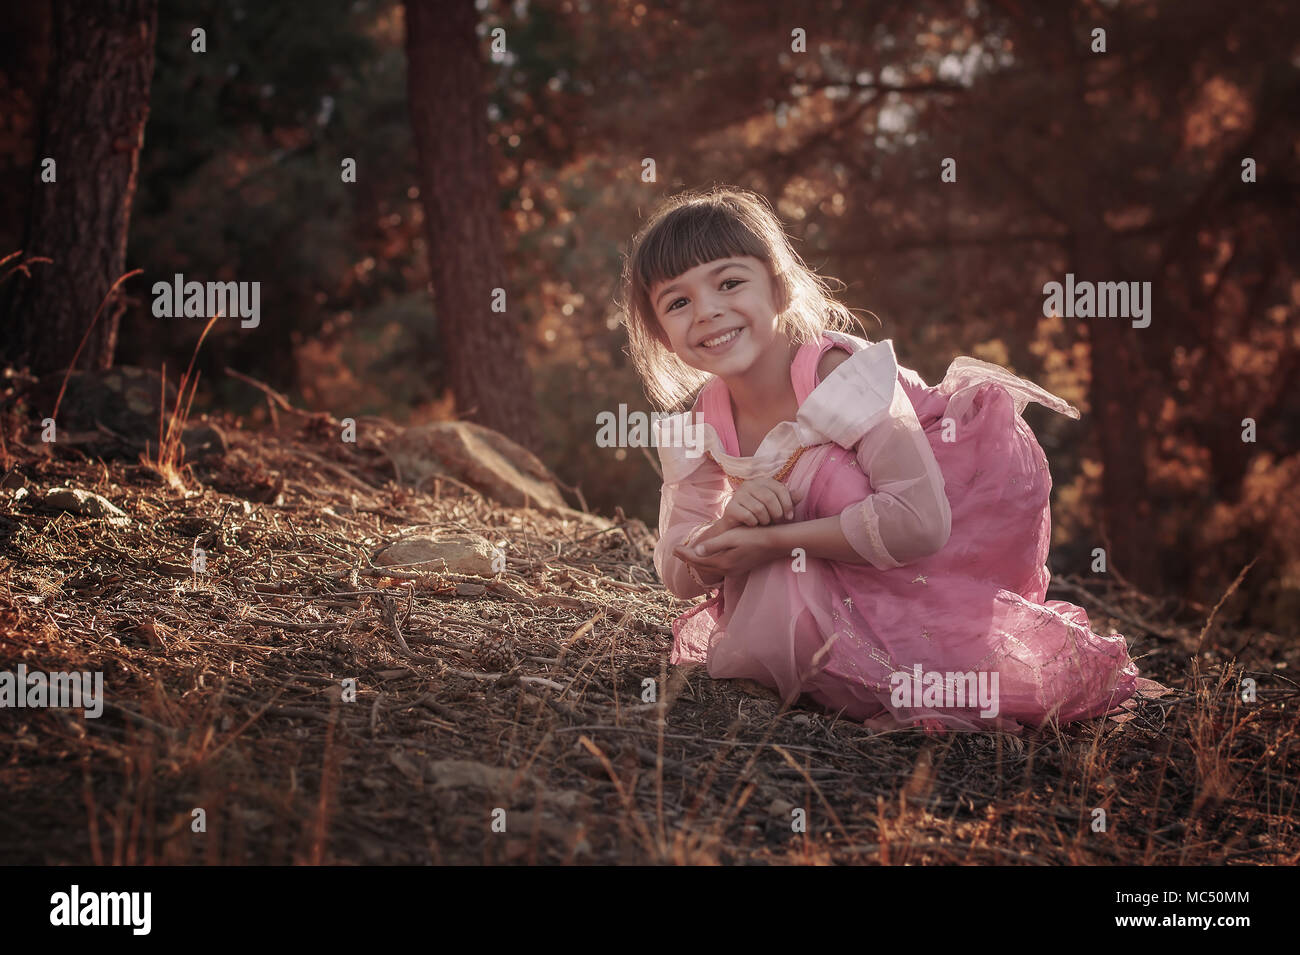 Cute Little Girl In The Forest Stock Photo